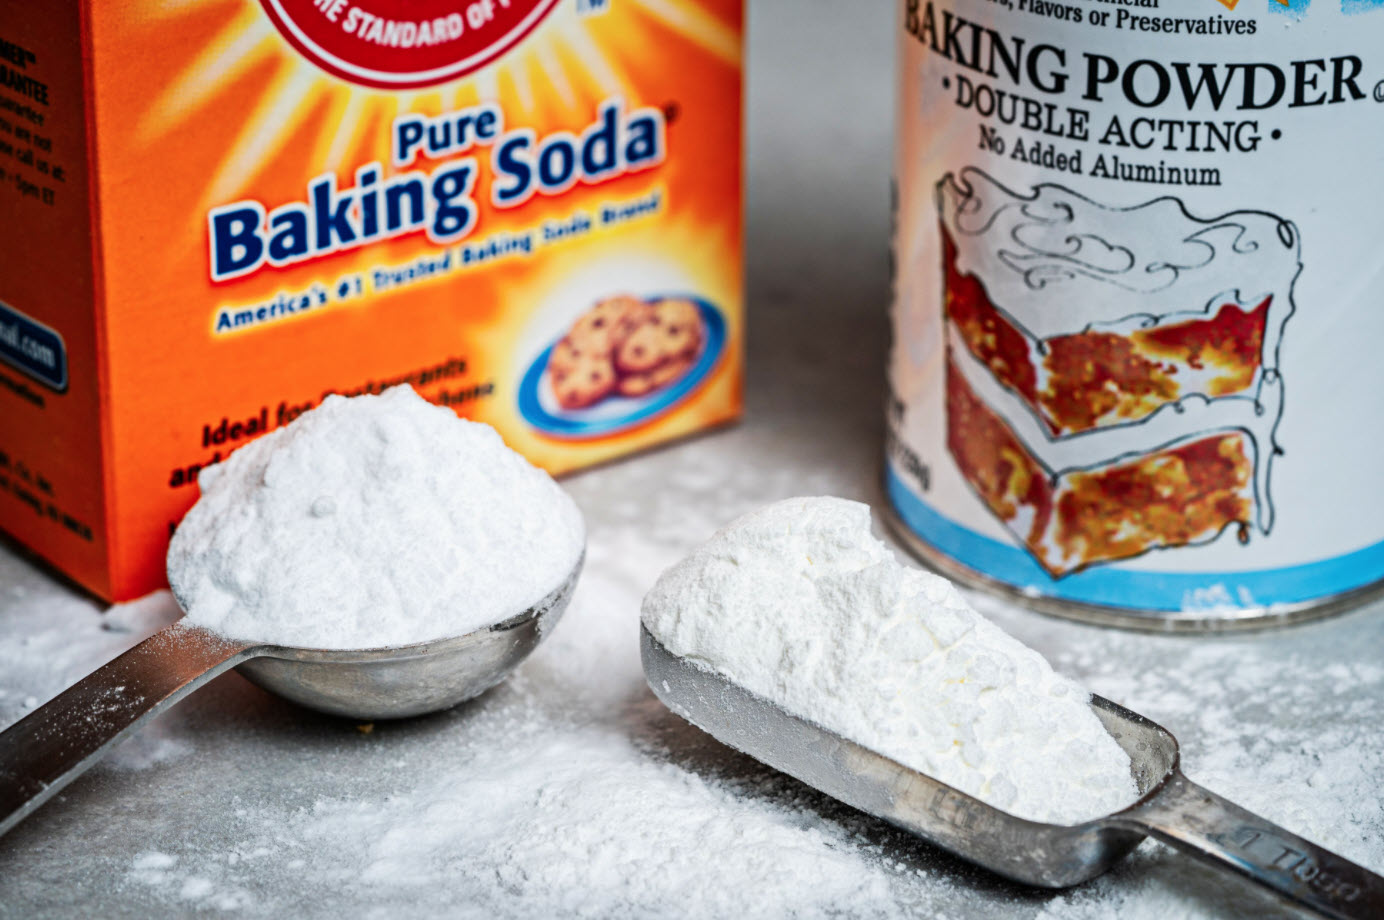 What is baking soda good for